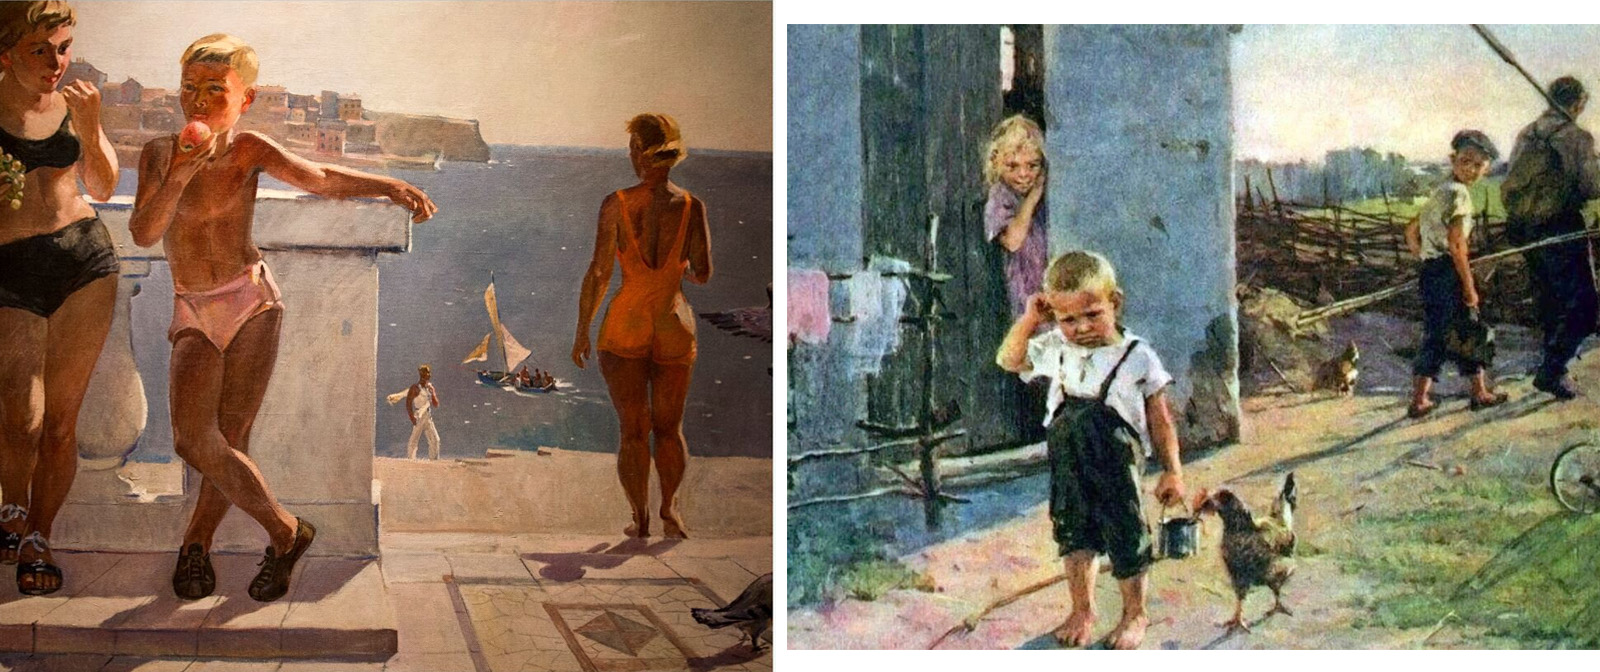 About children and childhood paintings of famous artists, bringing awe-inspiring memories.